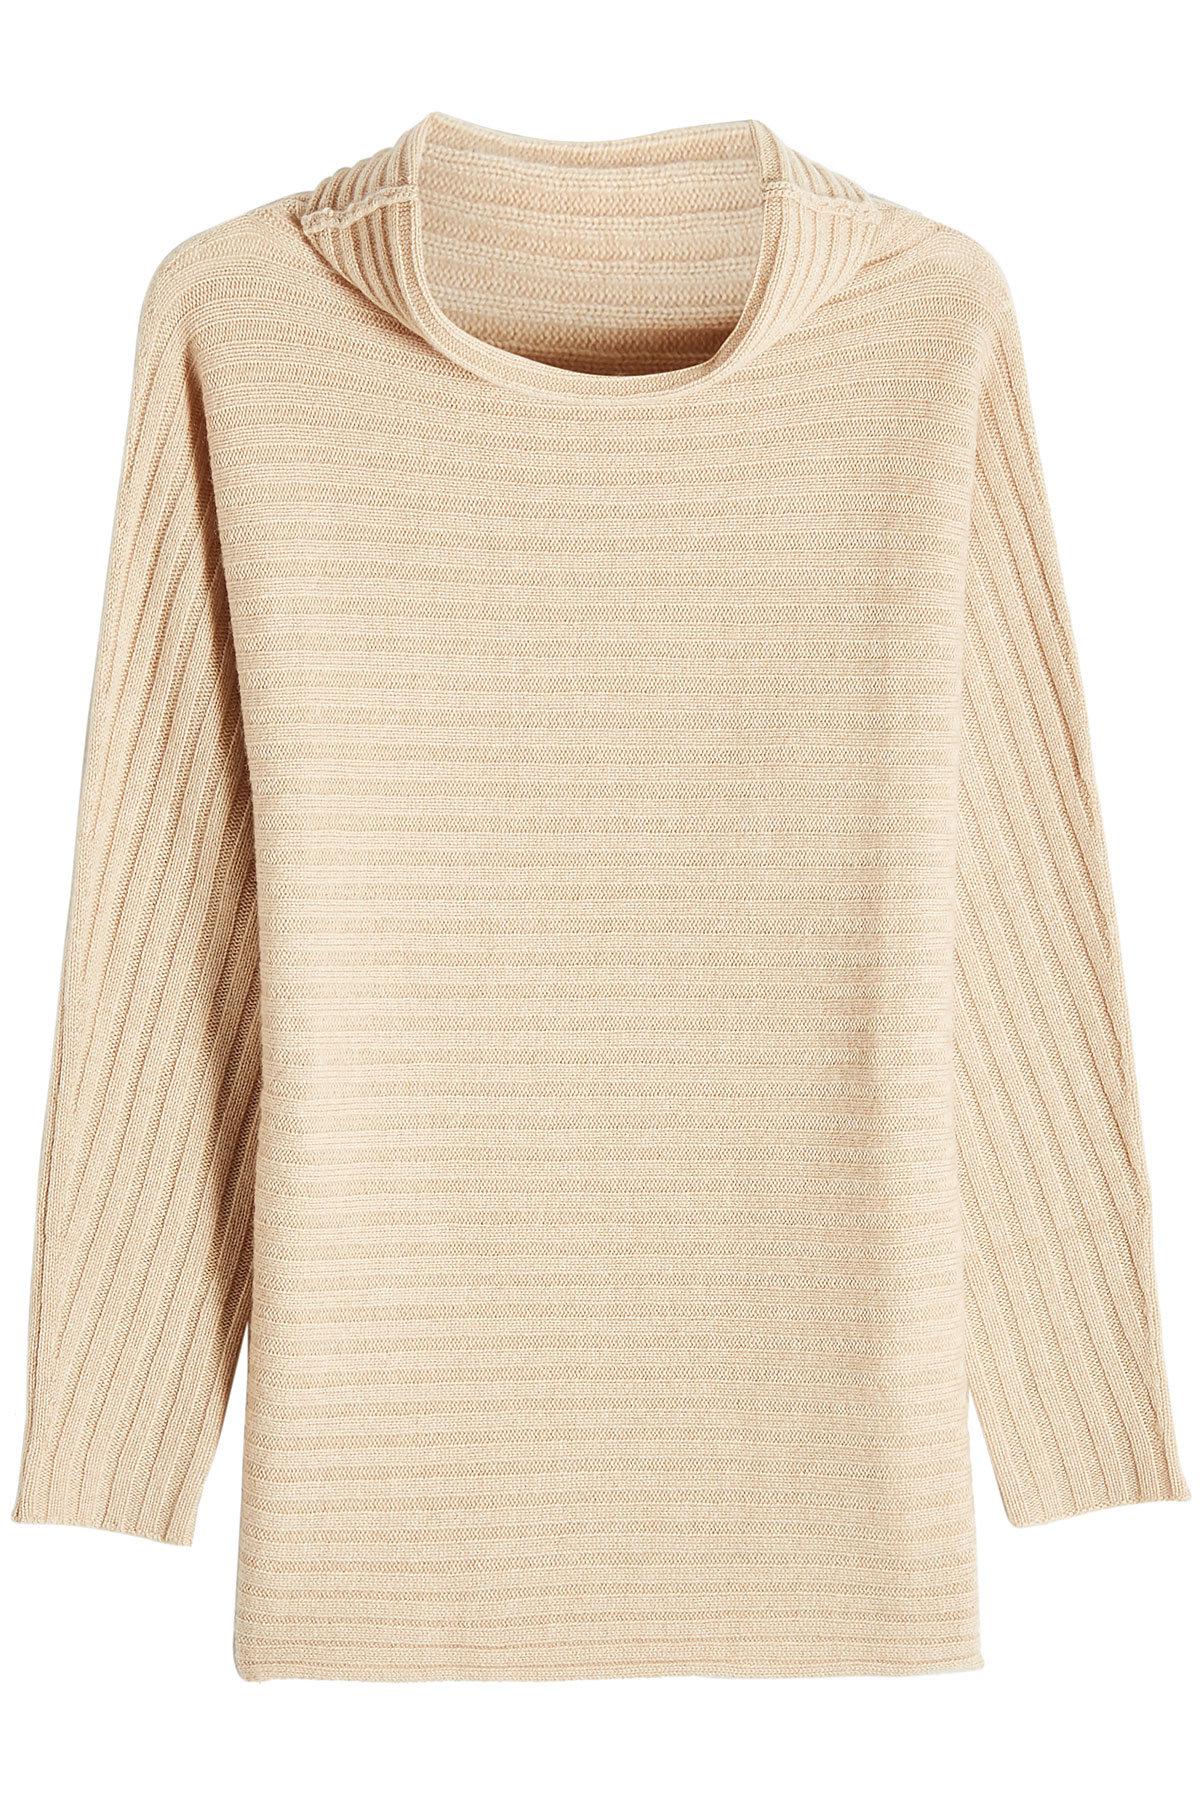 Lyst - Max Mara Ribbed Cashmere Pullover in Natural